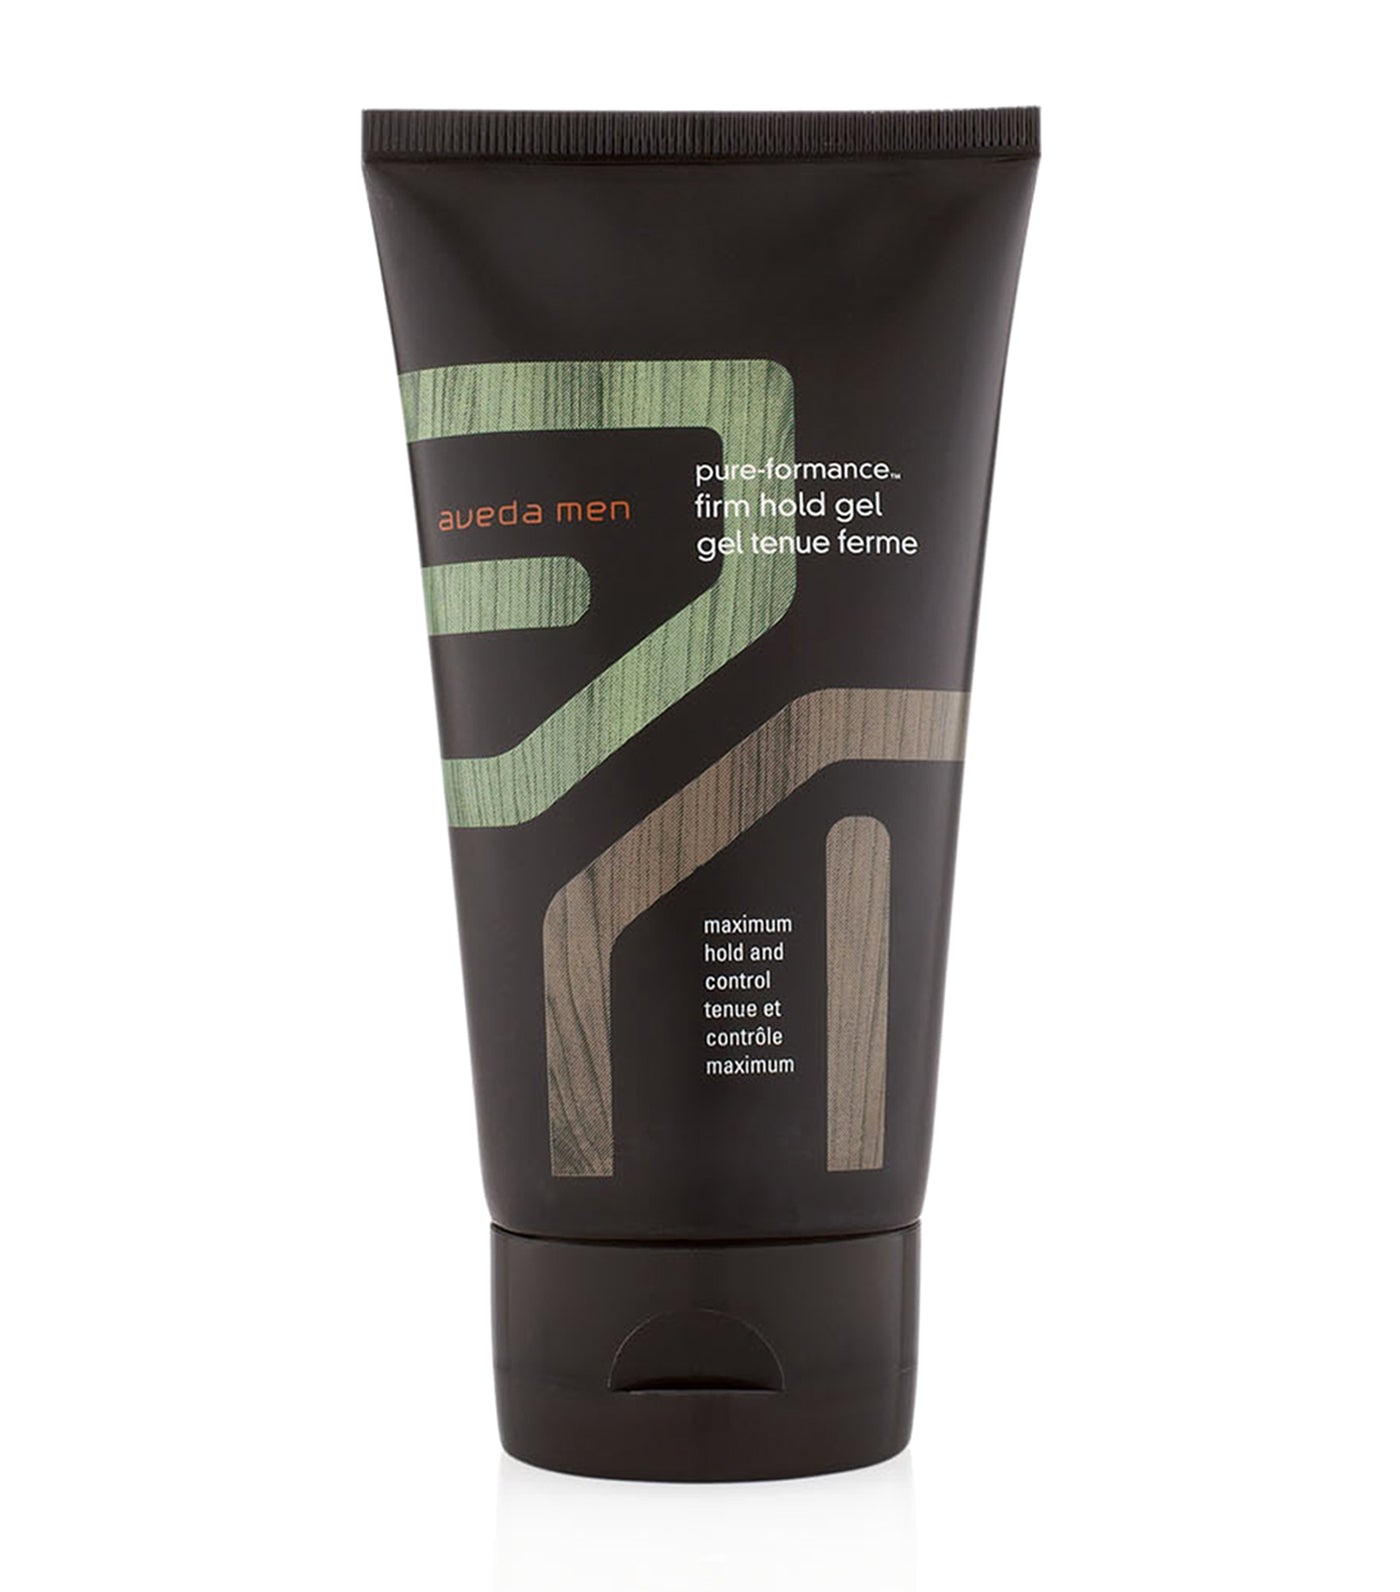 Aveda for aveda men pure-formance Firm Hold Gel